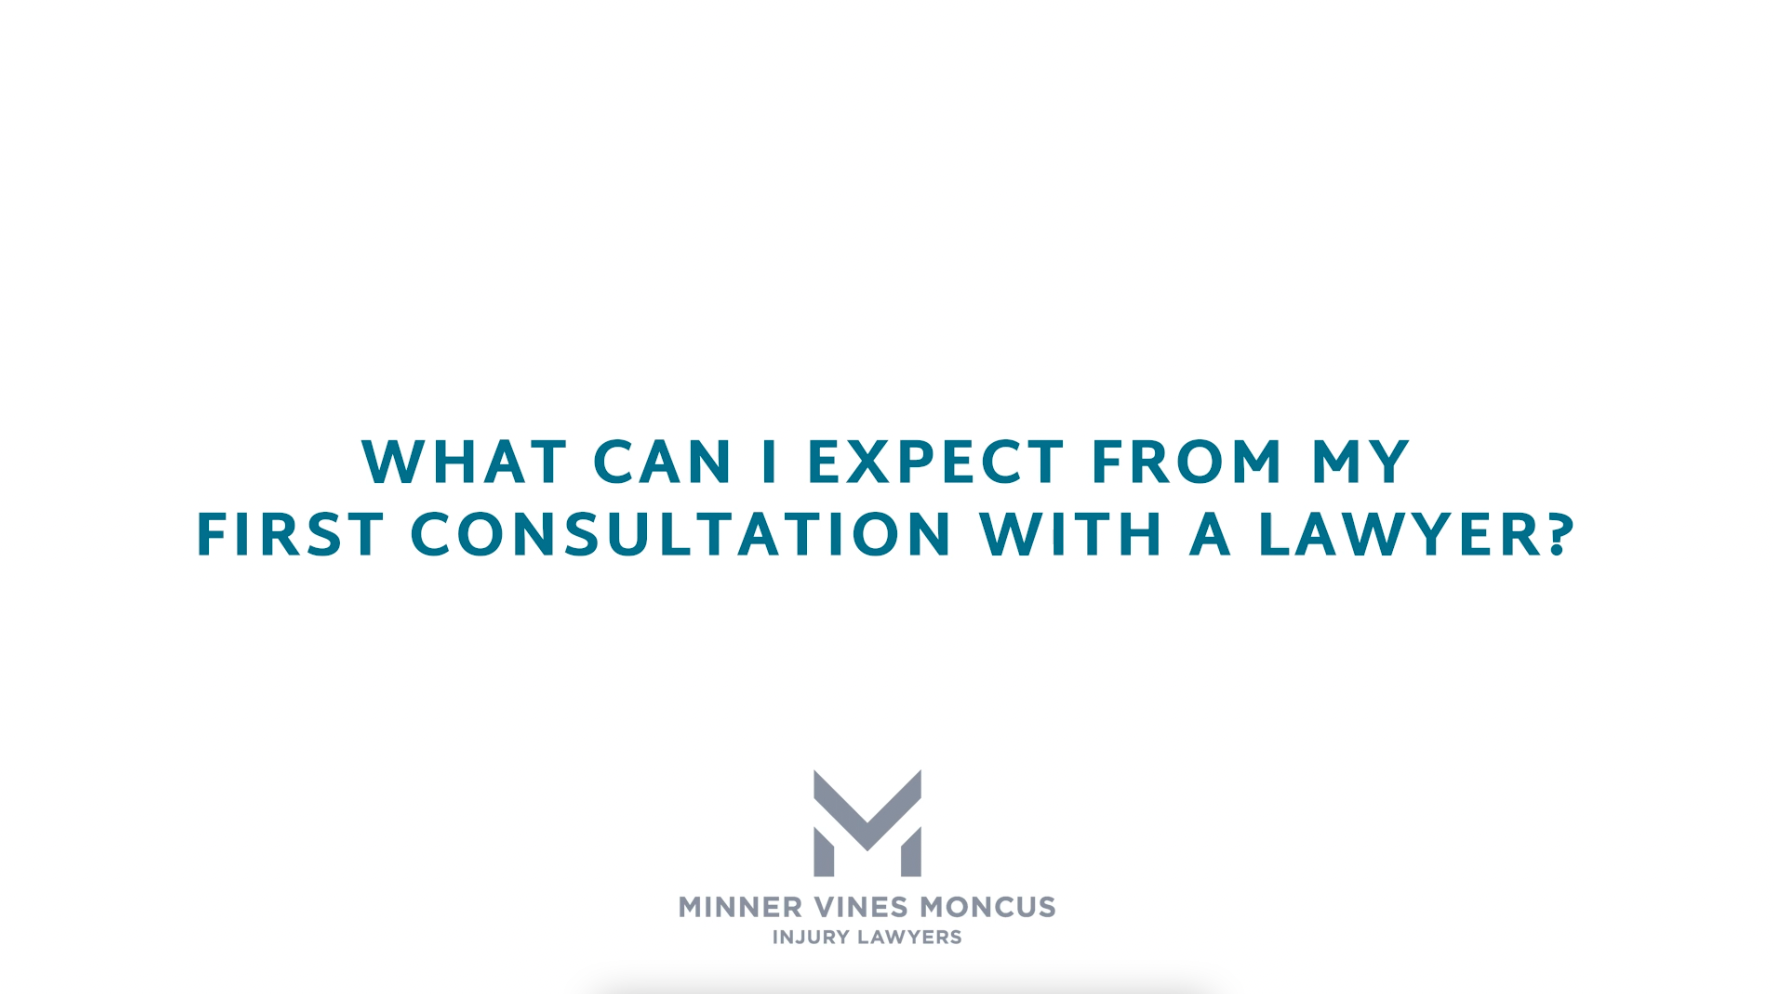 What can I expect from my first consultation with a lawyer?